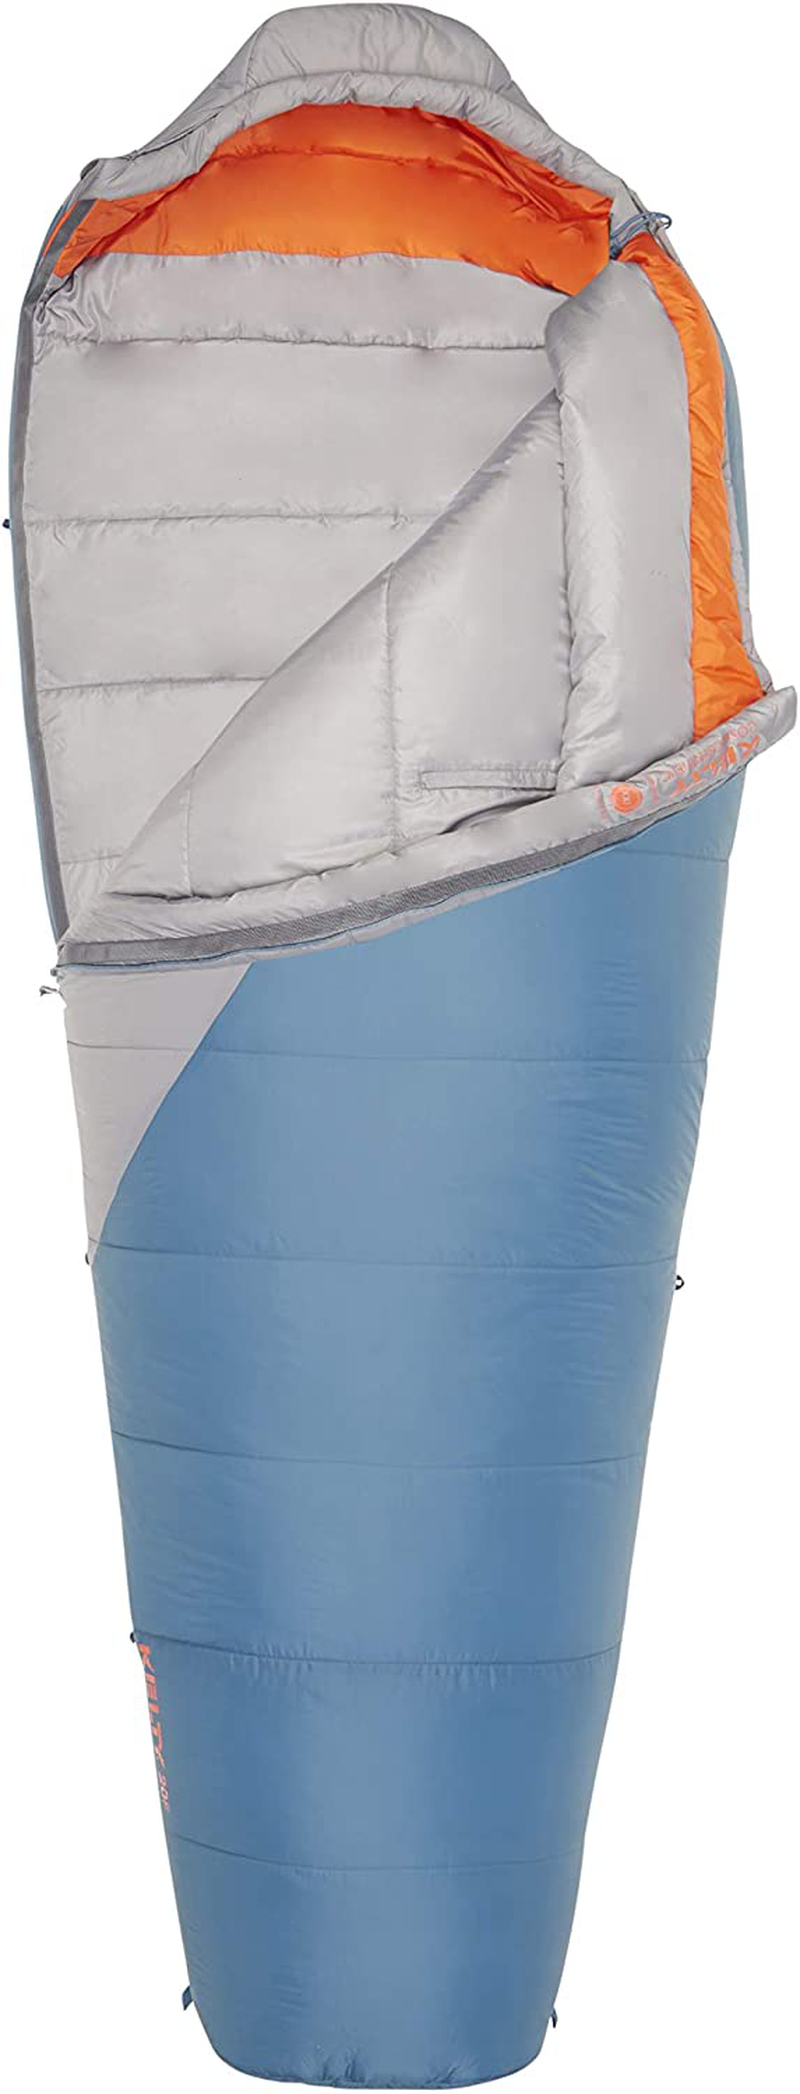 Kelty Cosmic Synthetic Fill 20 Degree Backpacking Sleeping Bag – Compression Straps, Stuff Sack Included Sporting Goods > Outdoor Recreation > Camping & Hiking > Sleeping BagsSporting Goods > Outdoor Recreation > Camping & Hiking > Sleeping Bags Kelty   